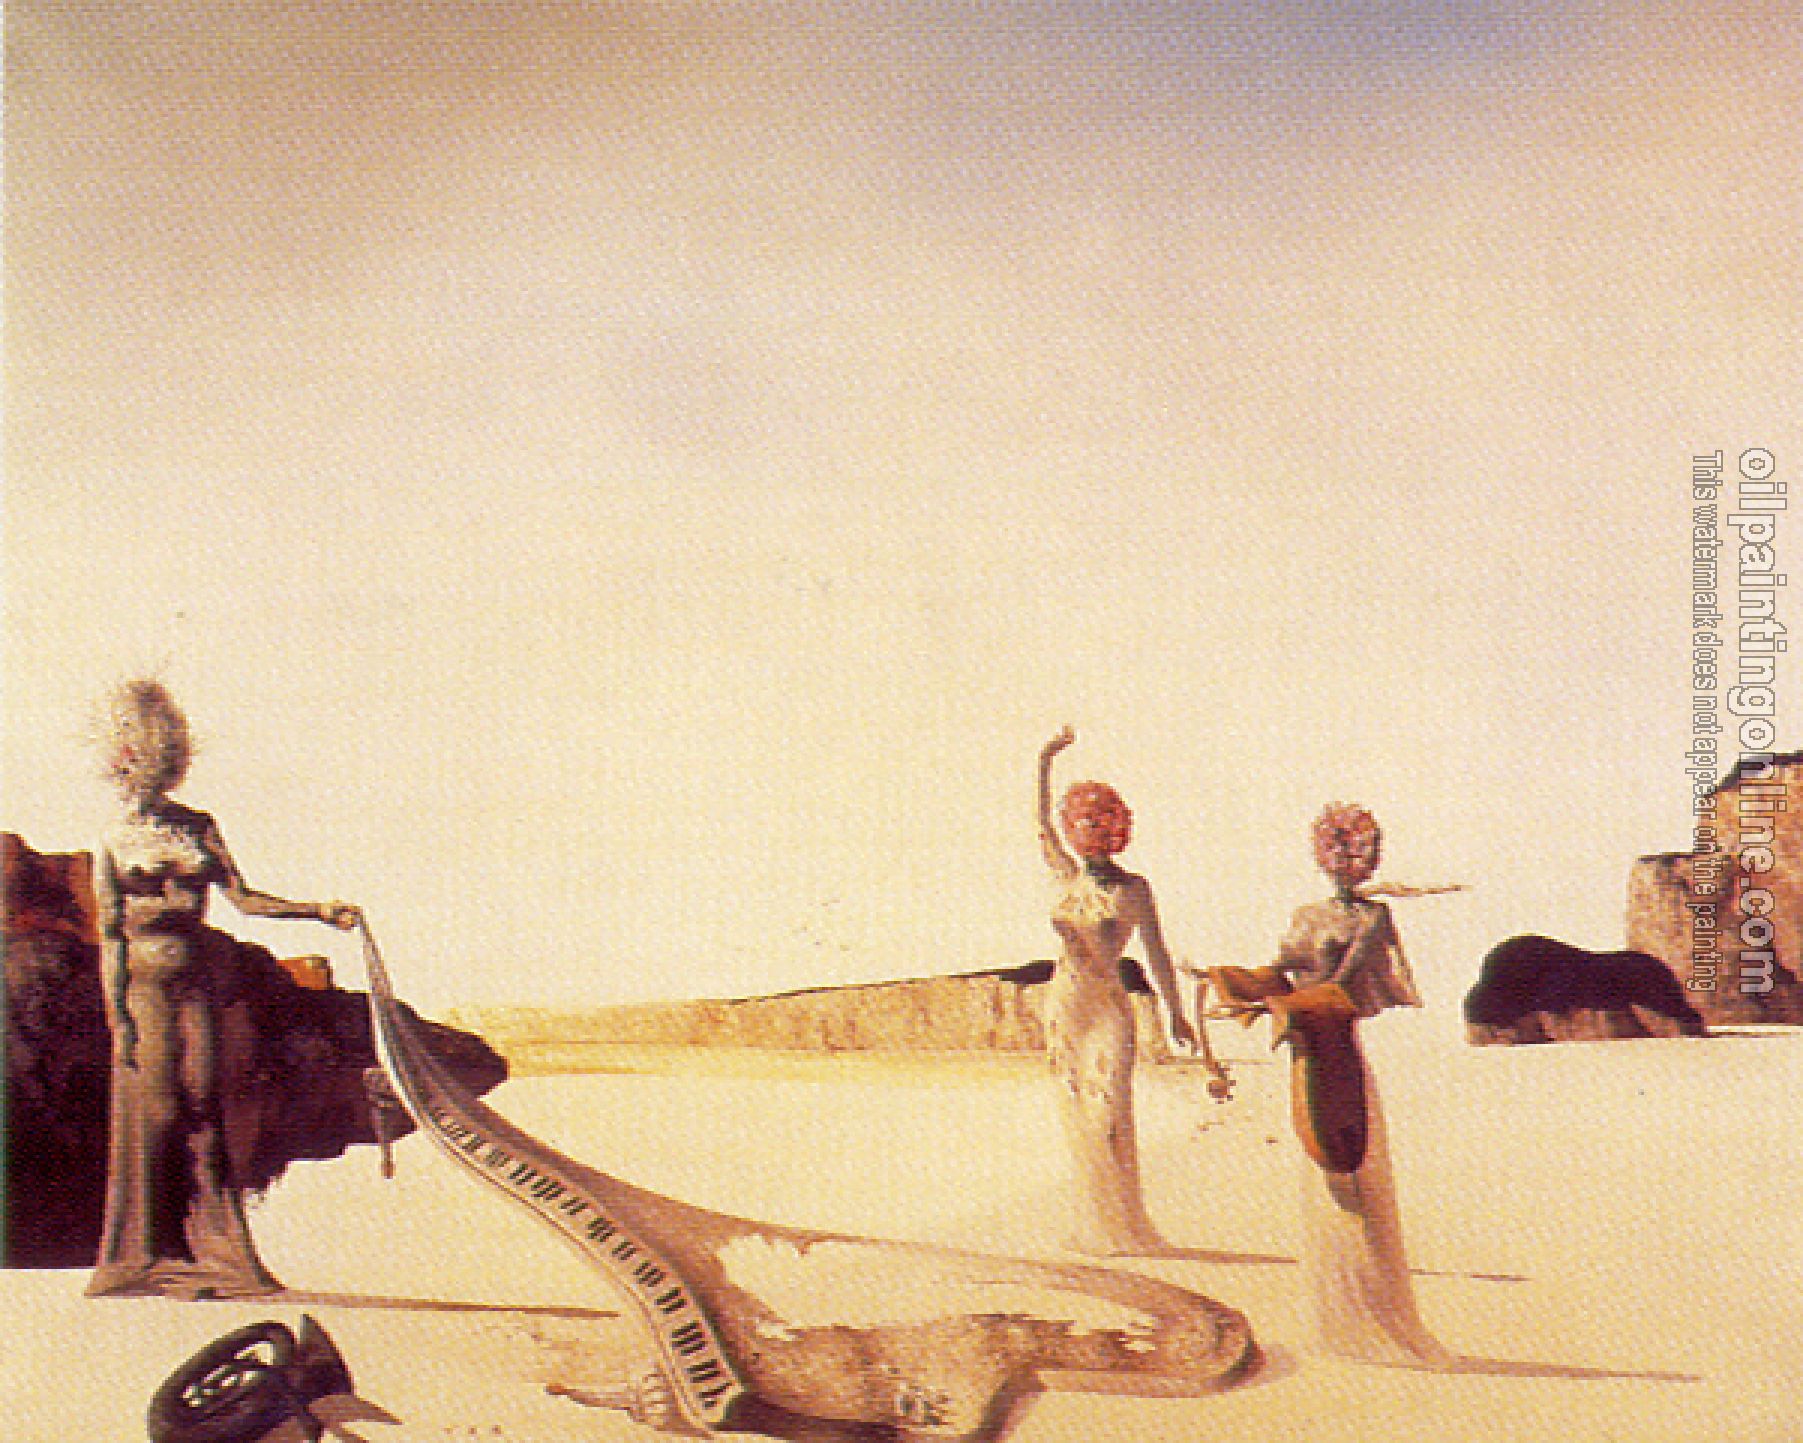 Dali, Salvador - Therr Young Surrealist Women Holding in their Arms the Skins of an Orchestra